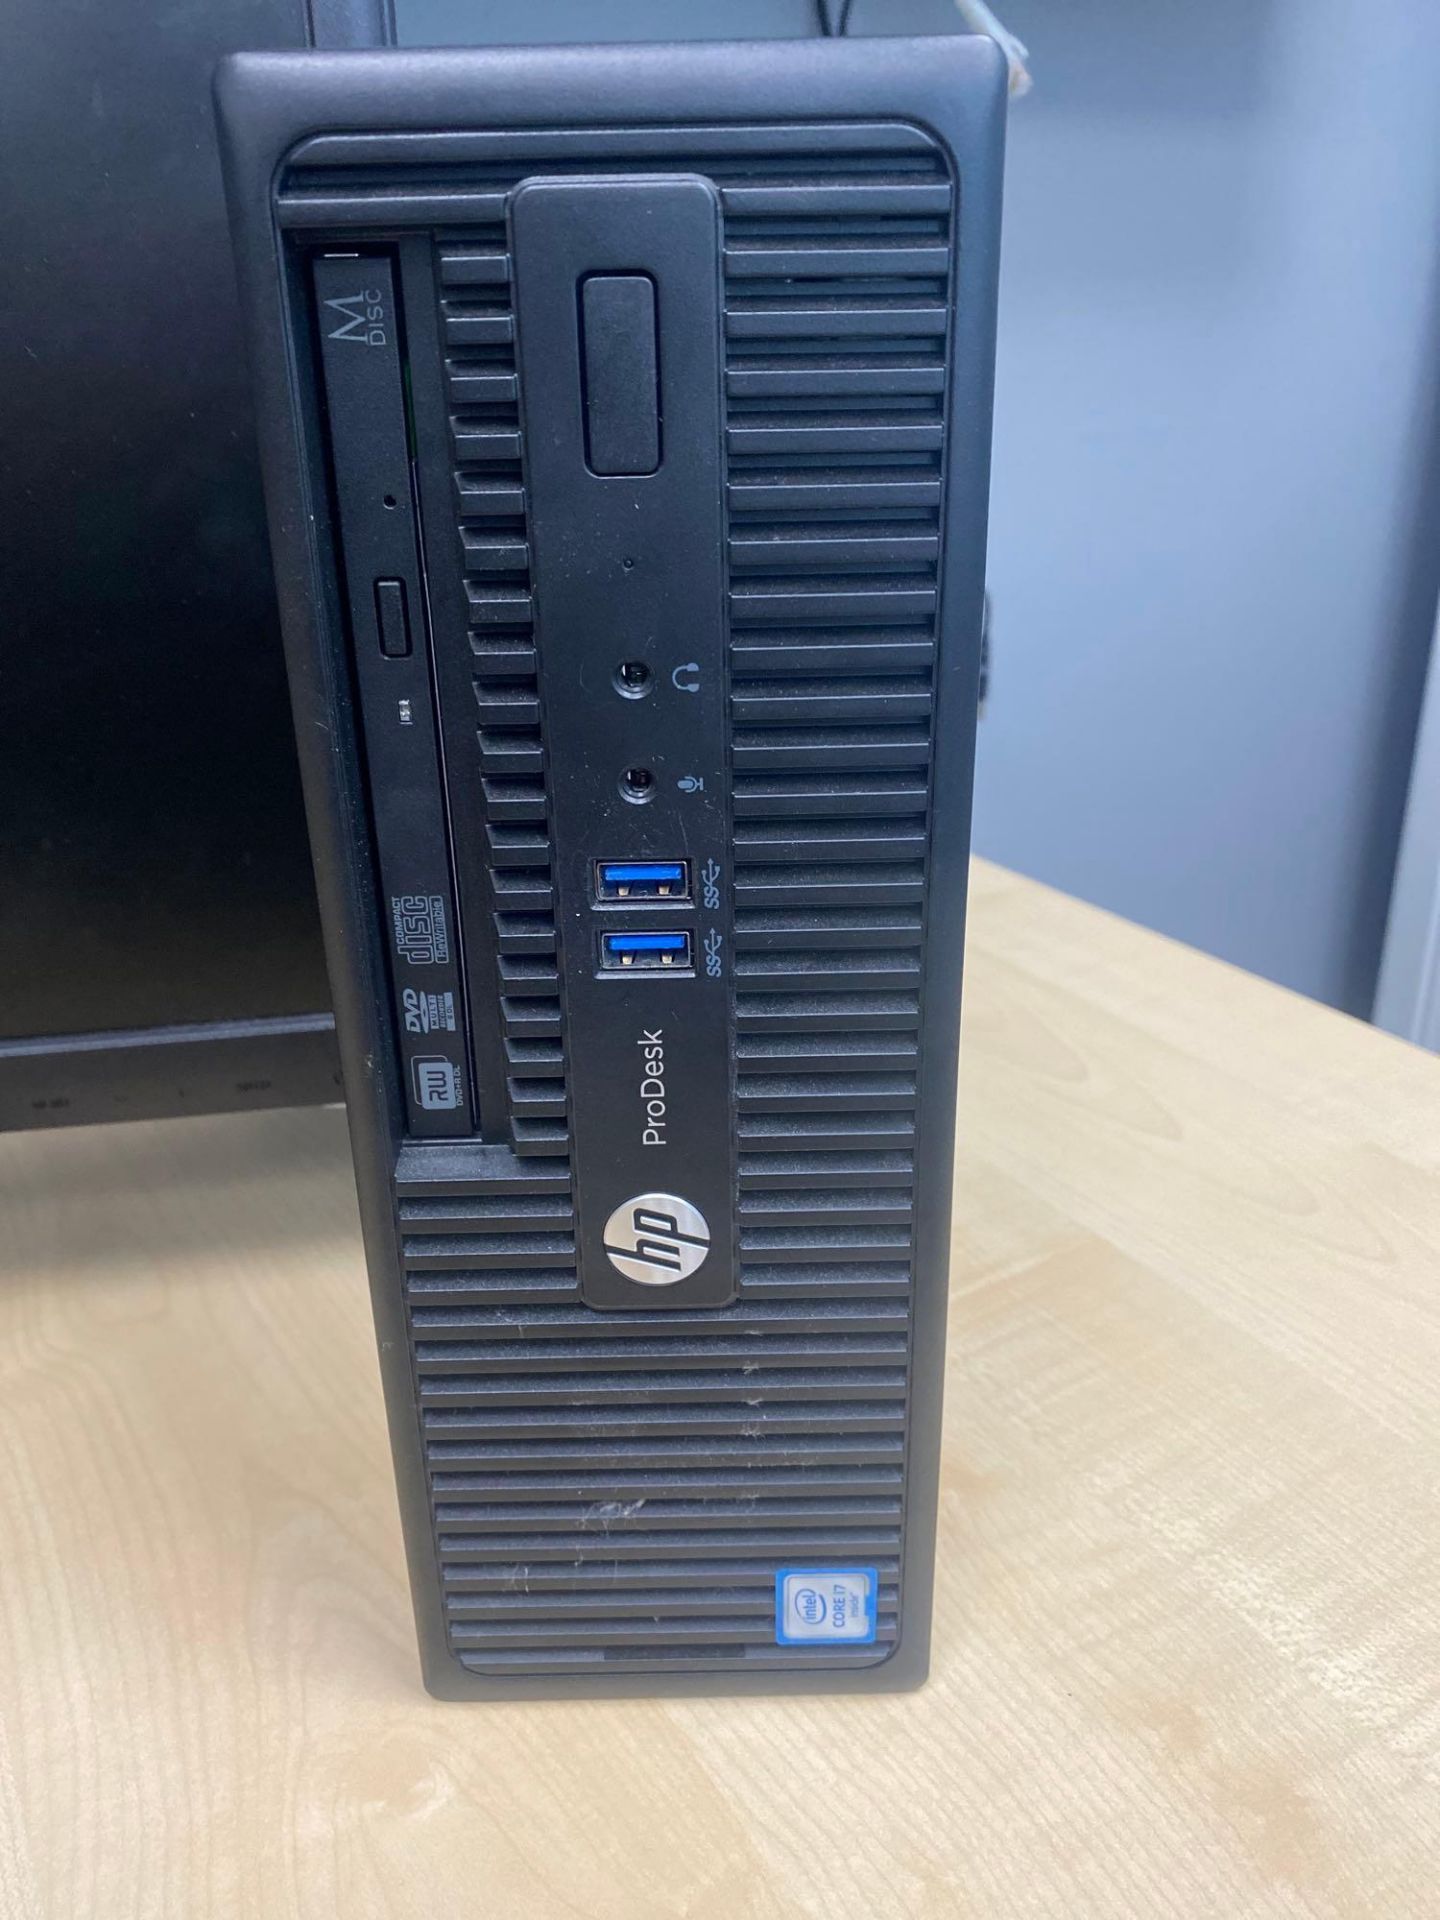 Hewlett Packard Pro Desk desktop computer with i7 processor, serial number CZC6358Y7W and a Hanns- - Image 2 of 5